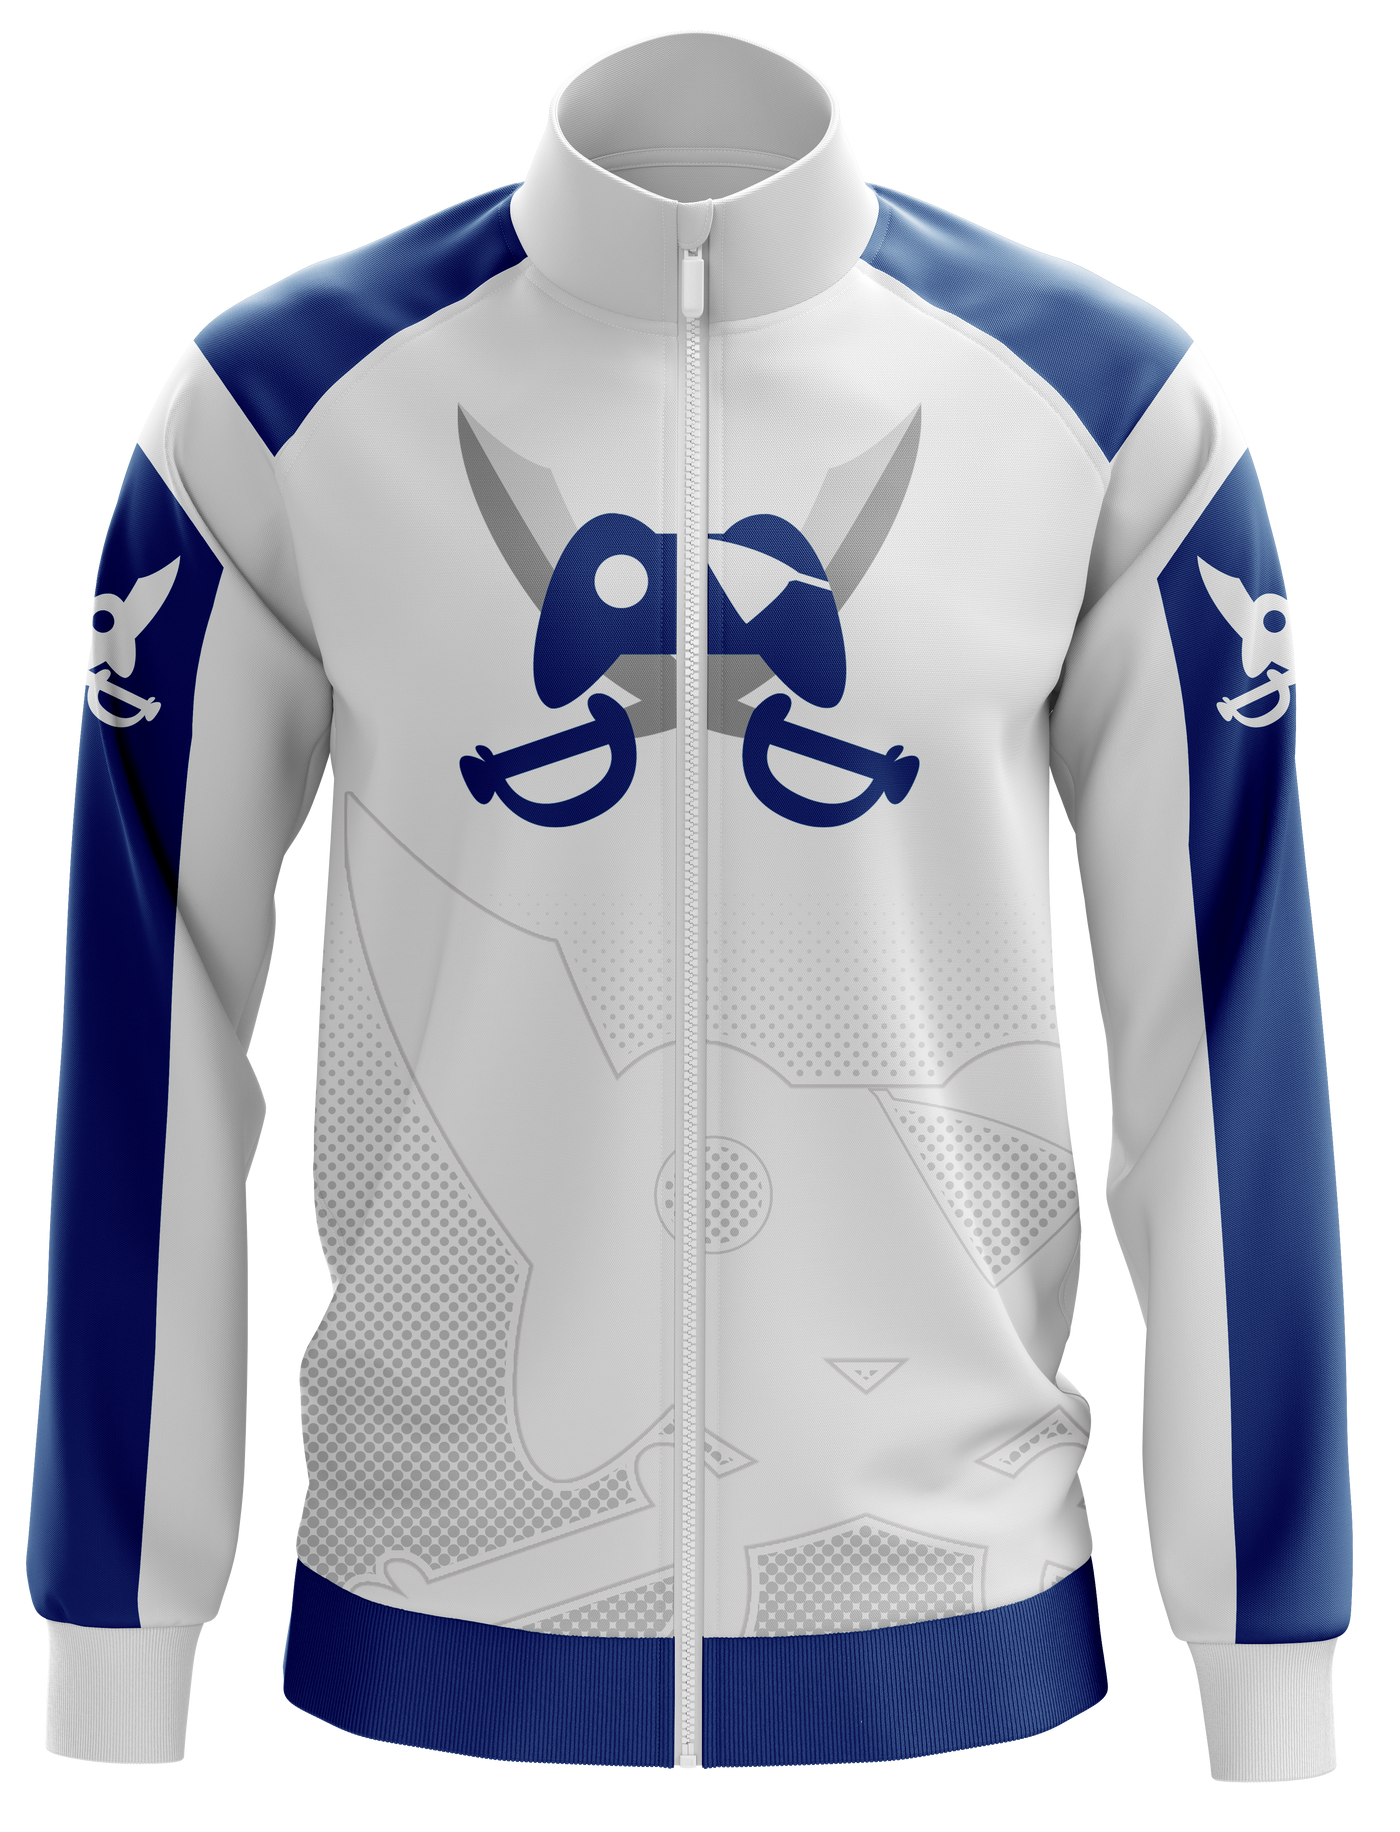 The Gaming Sector Pro Jacket